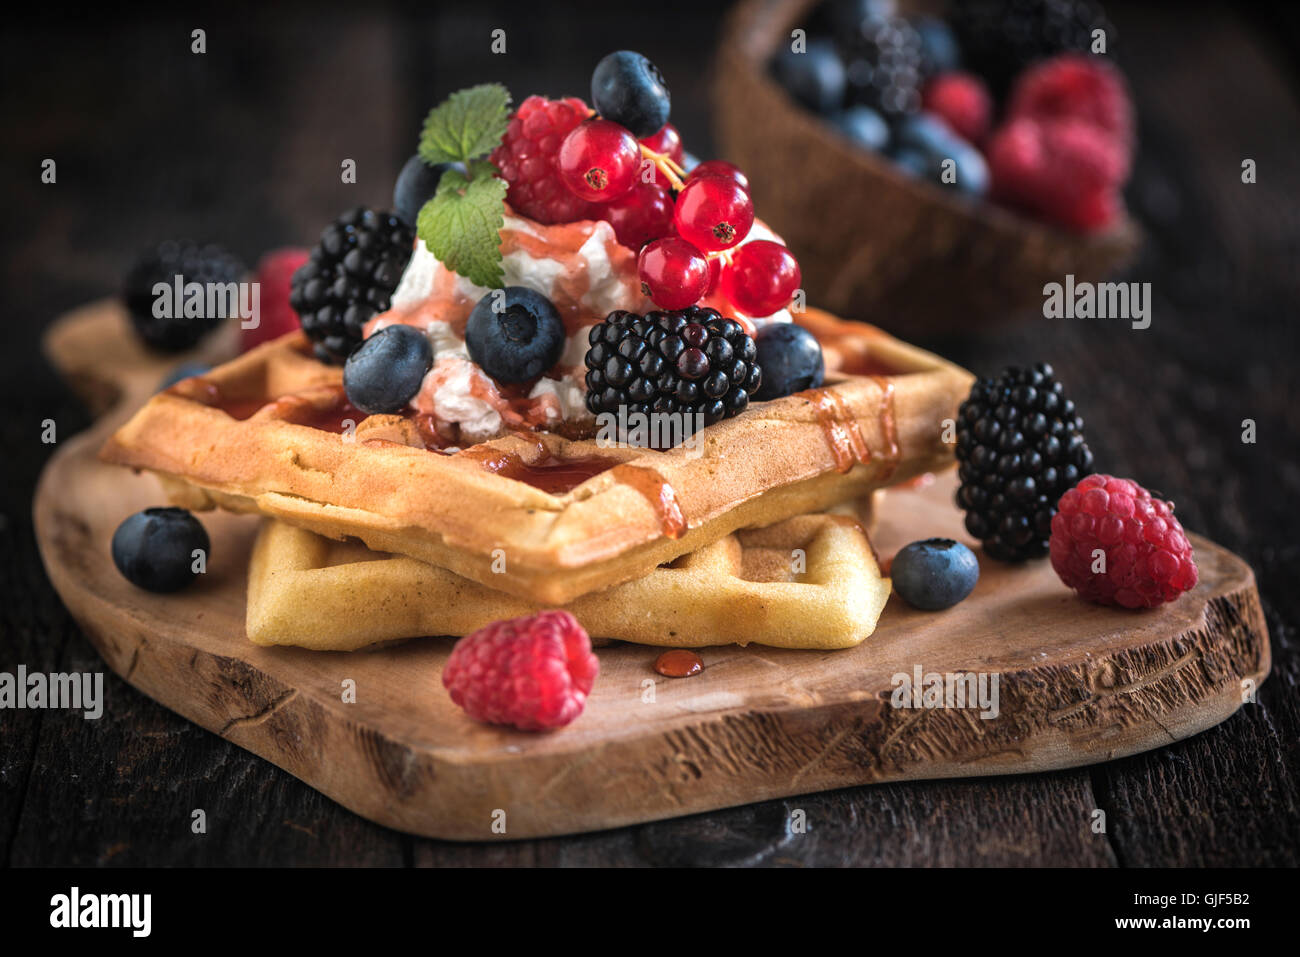 Belgium waffles on wooden board with berry fruits and ice cream on top,selective focus Stock Photo